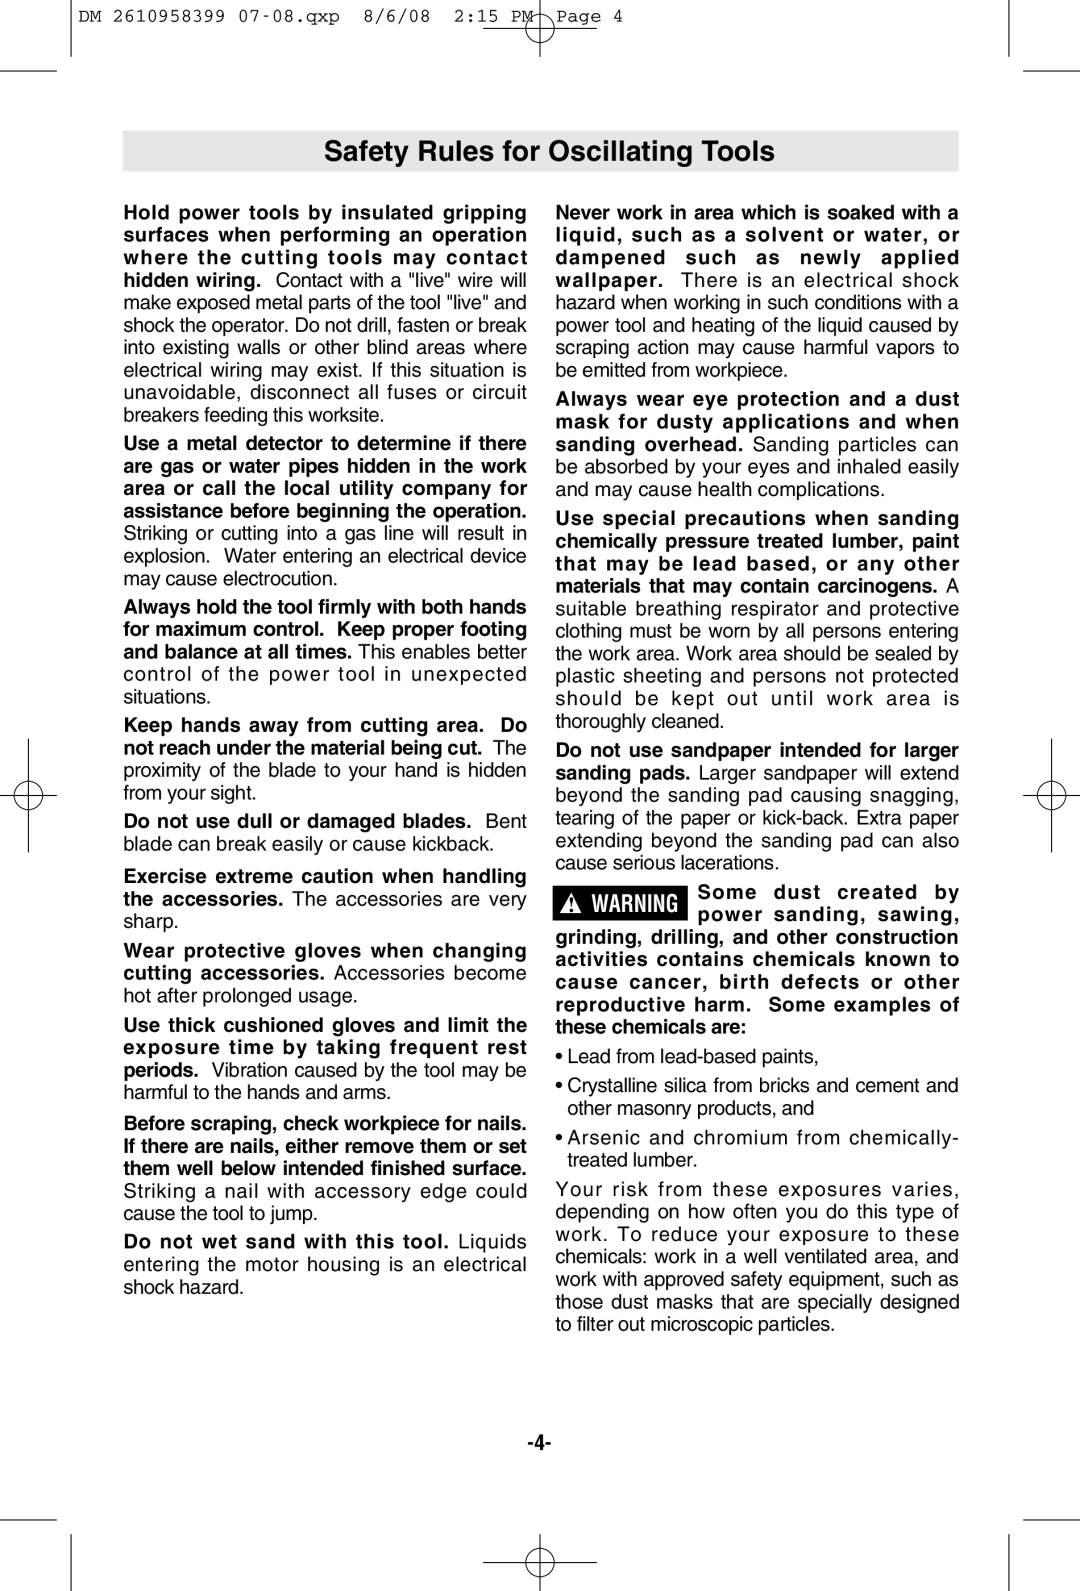 Dremel 6300 manual Safety Rules for Oscillating Tools, Sharp 